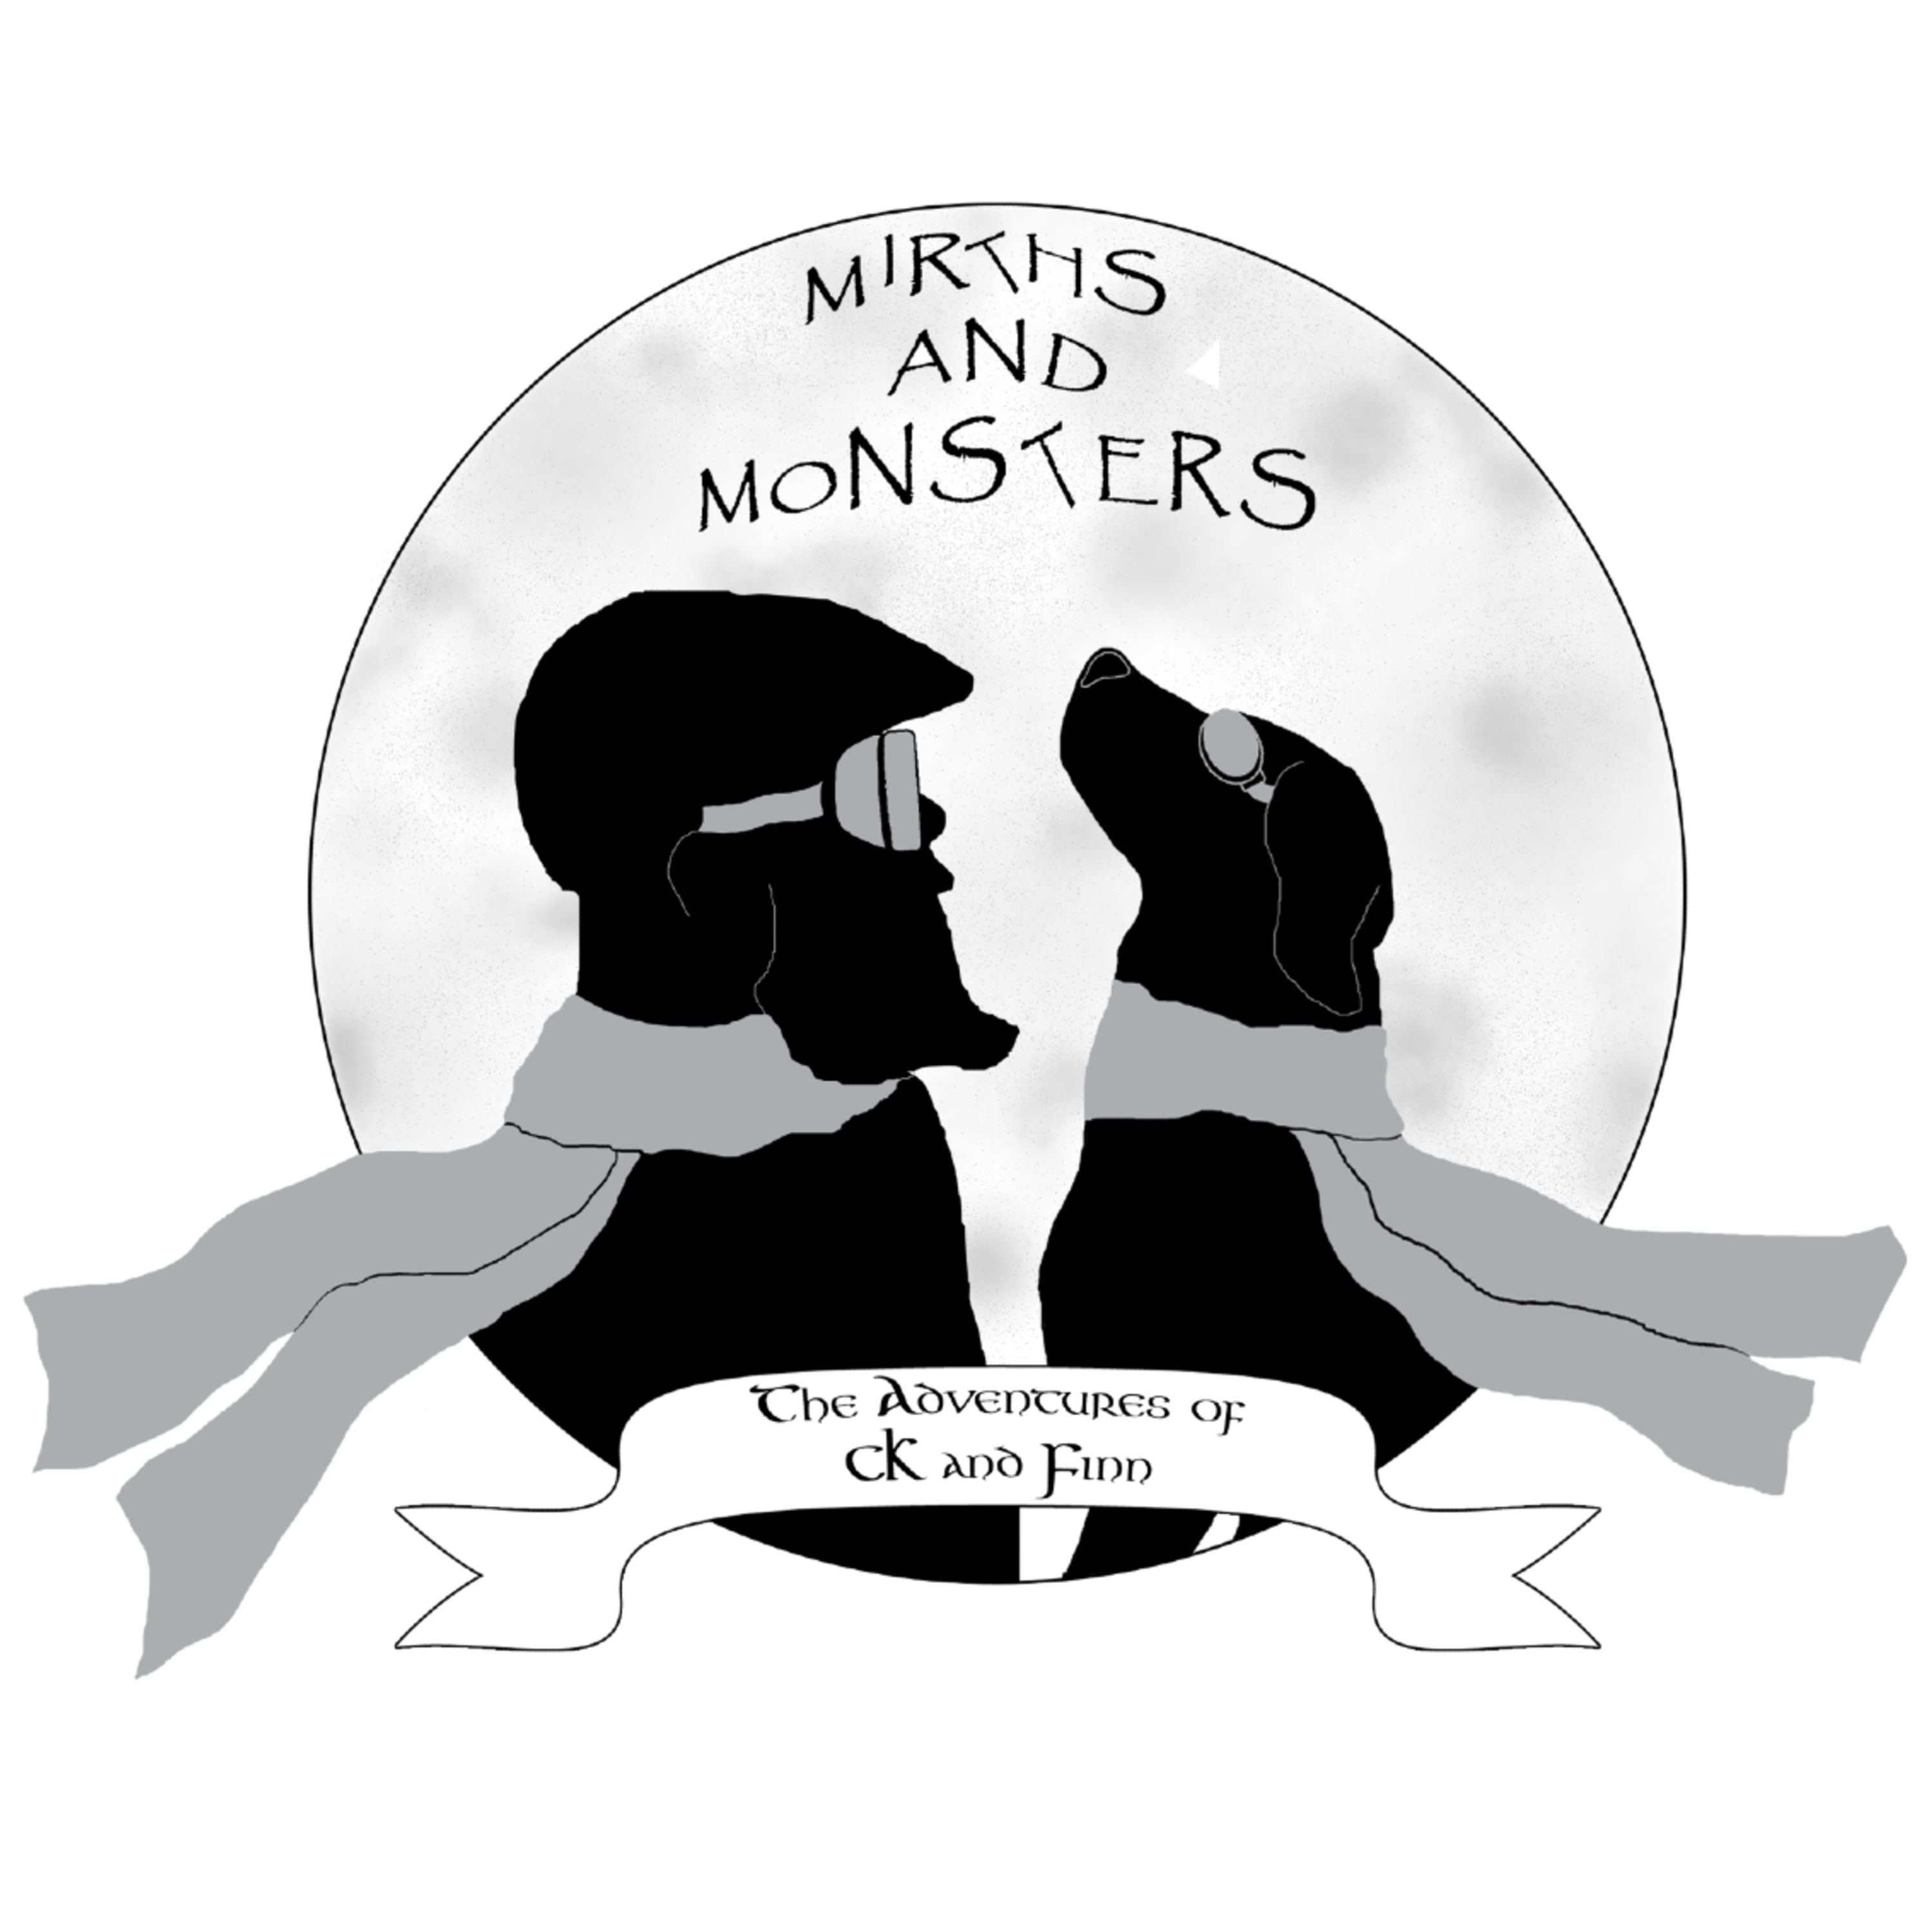 Mirths and Monsters-Some going to sleep stories and poems